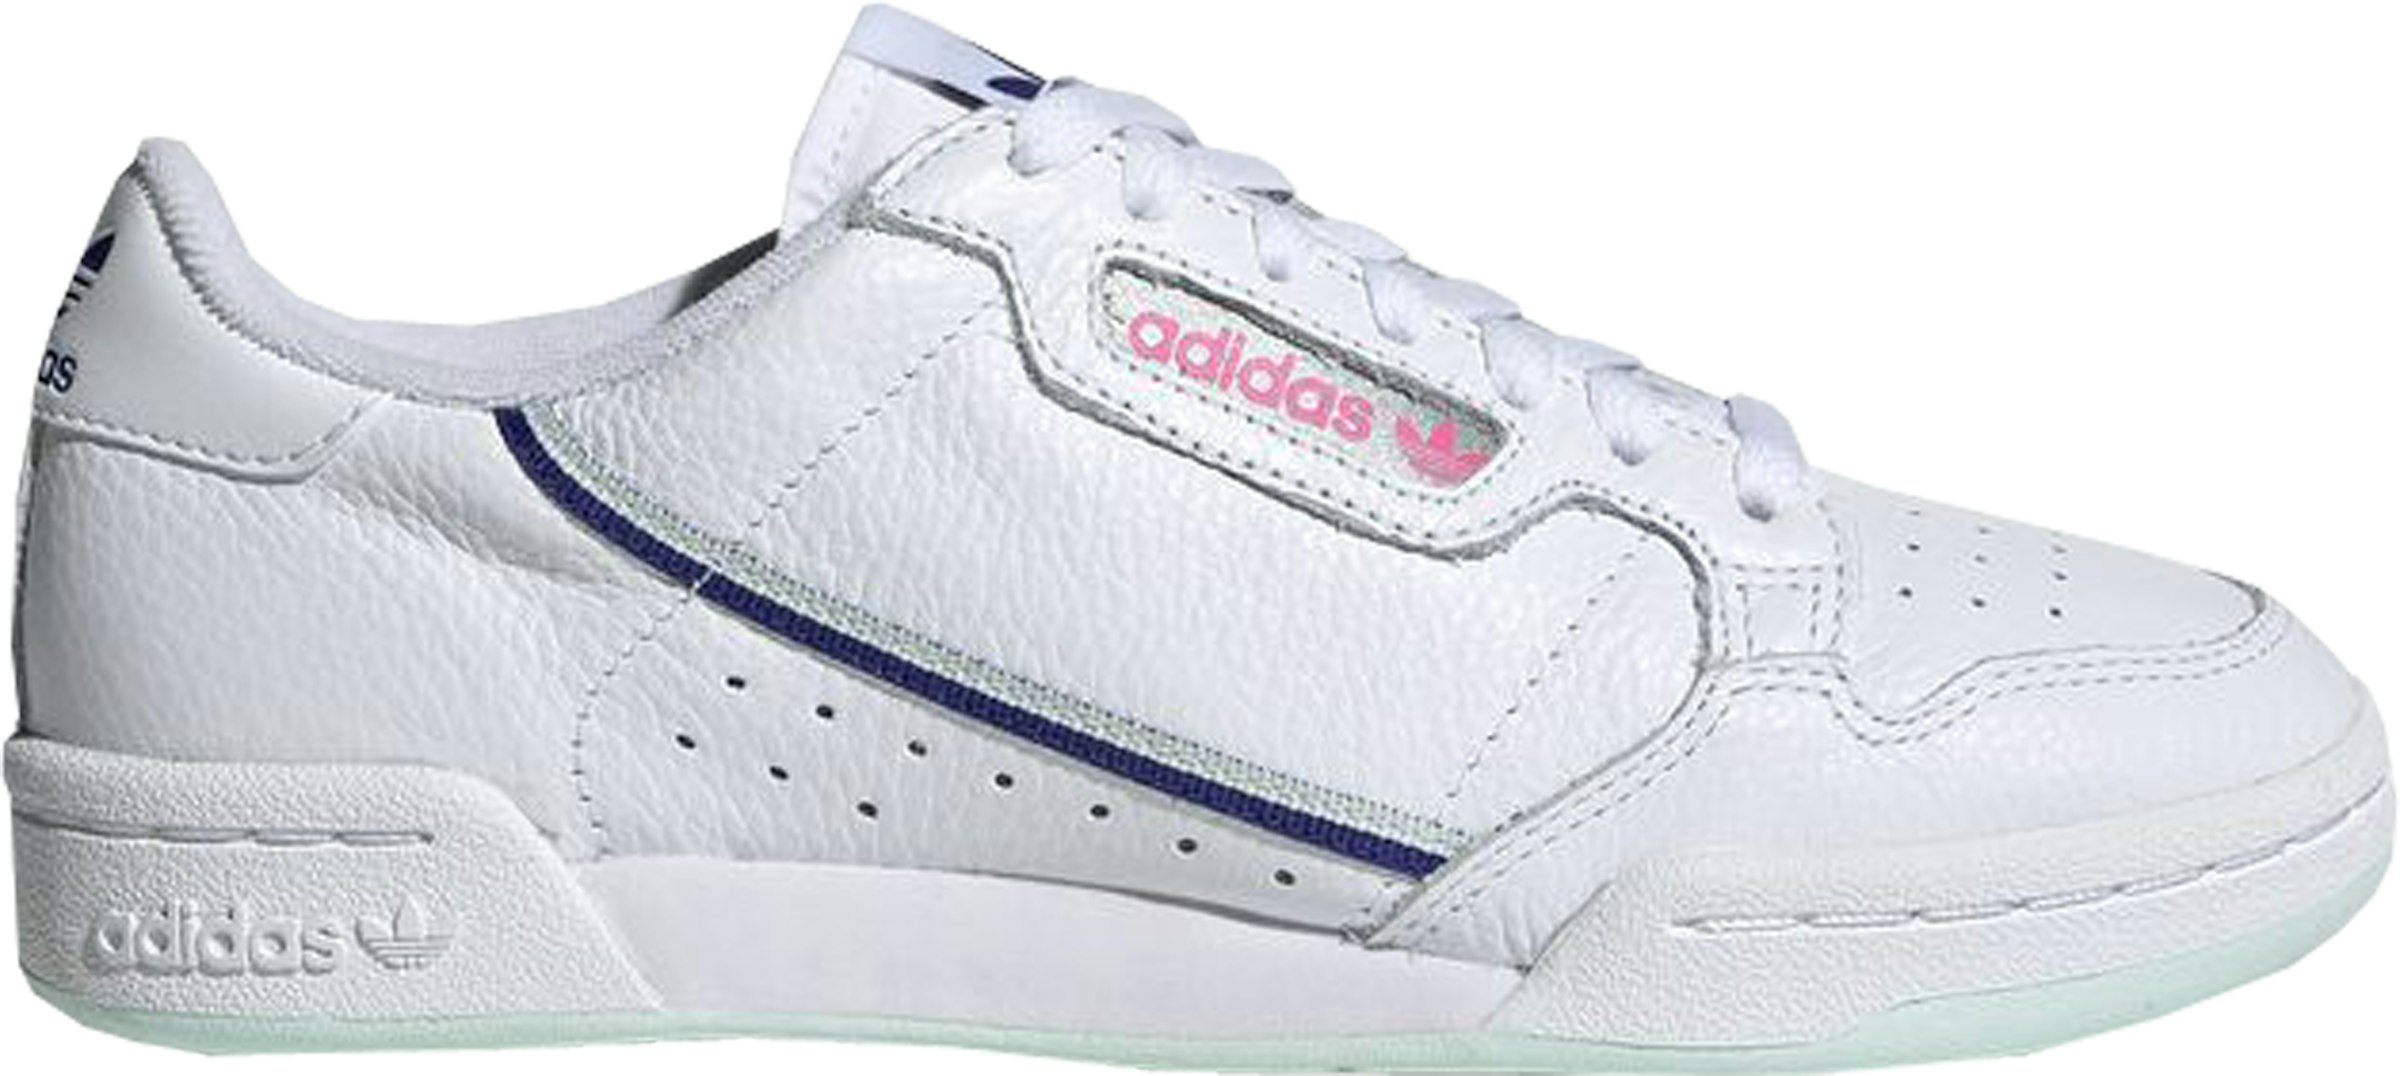 adidas Continental 80 Cloud White Ice Mint (Women's) - US